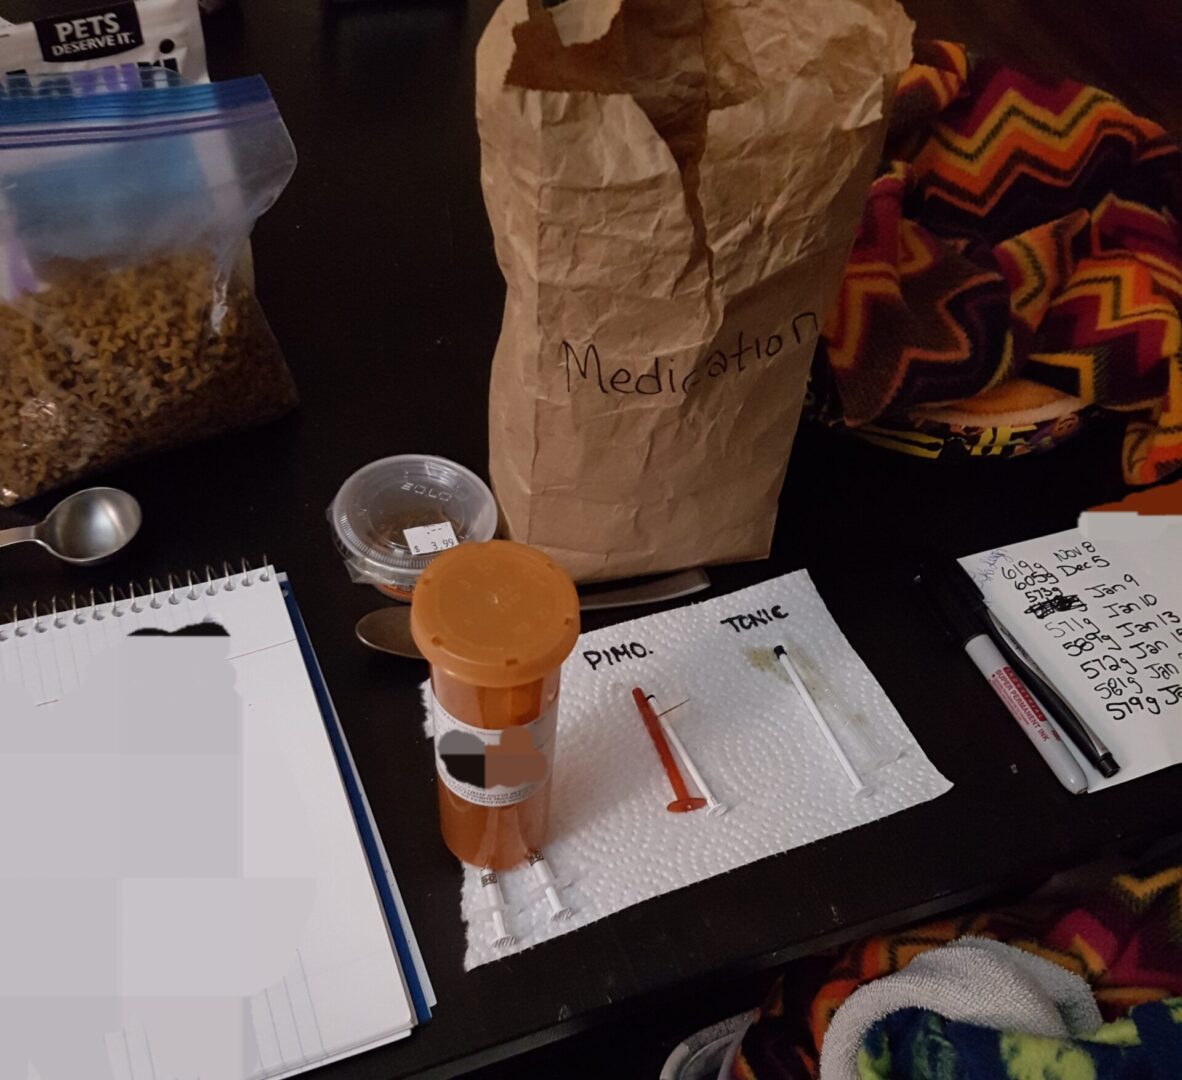 A table with papers, cups and a bag of cereal.